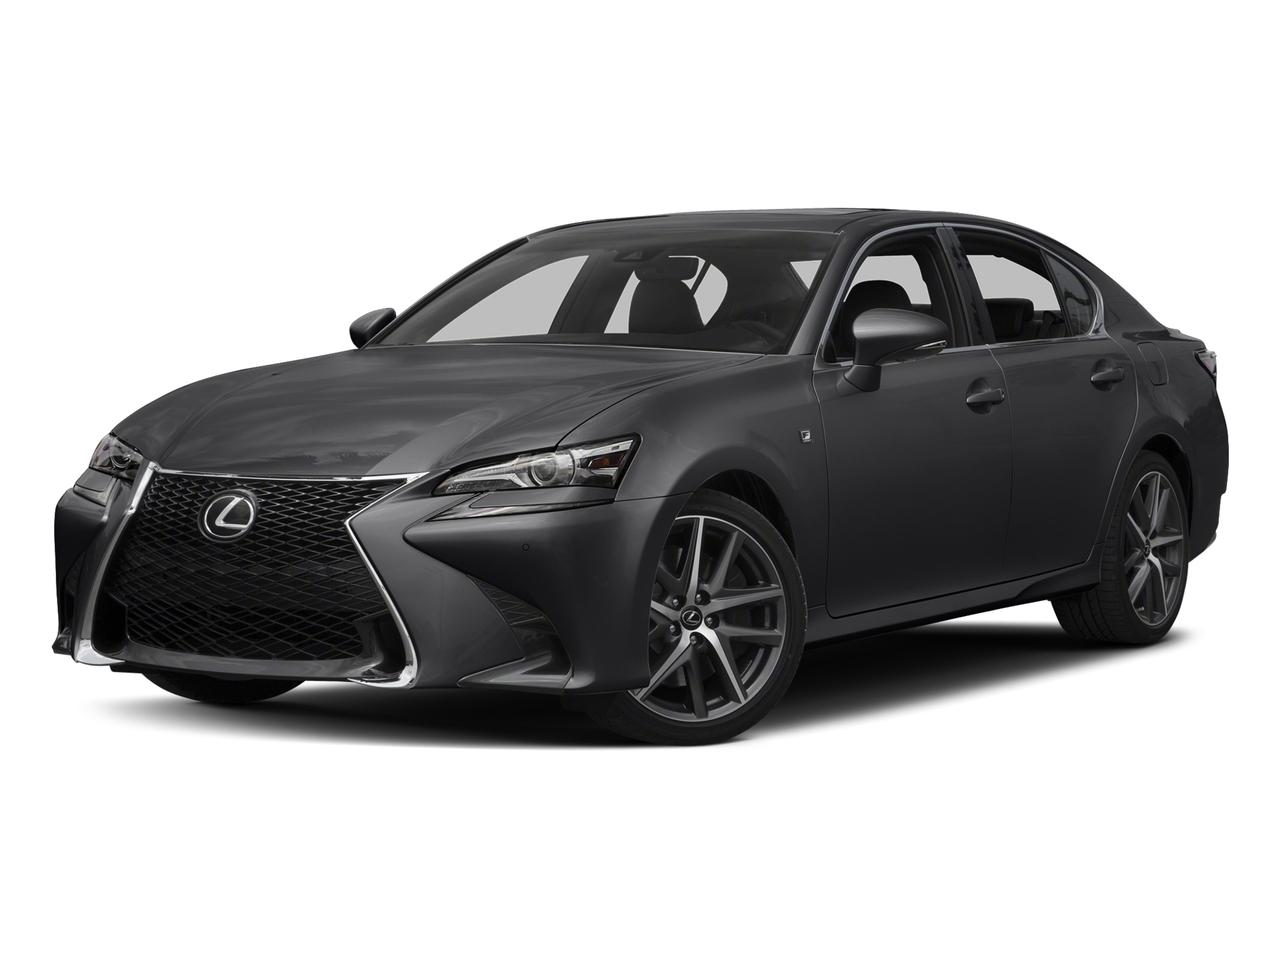 Used 17 Lexus Gs 350 F Sport Rwd Smoky Granite Mica For Sale Bay Area rc